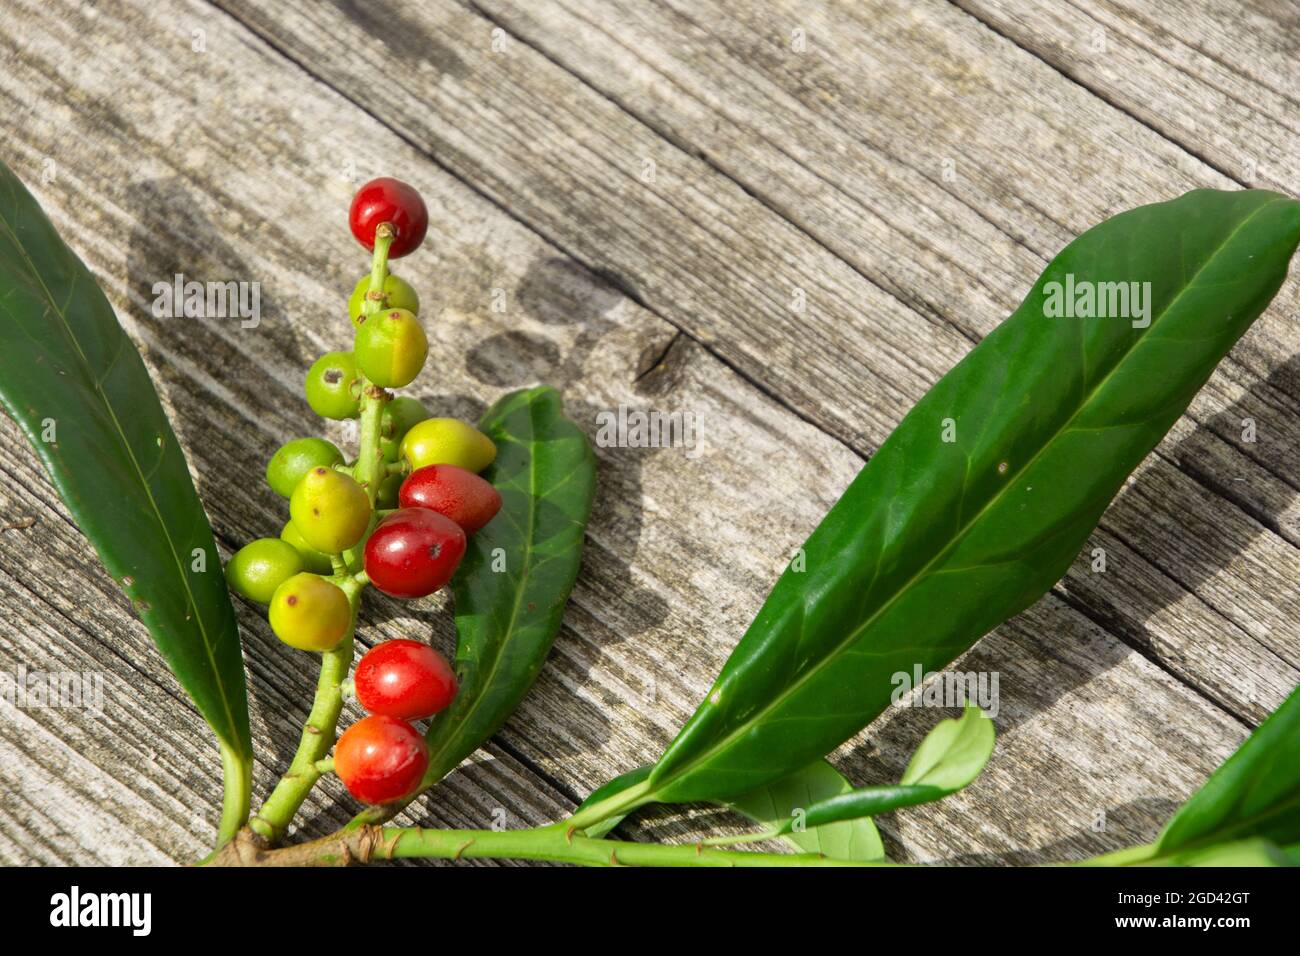 cut branch of common laurel with ripe und unripe fruits on wooden backdrop Stock Photo